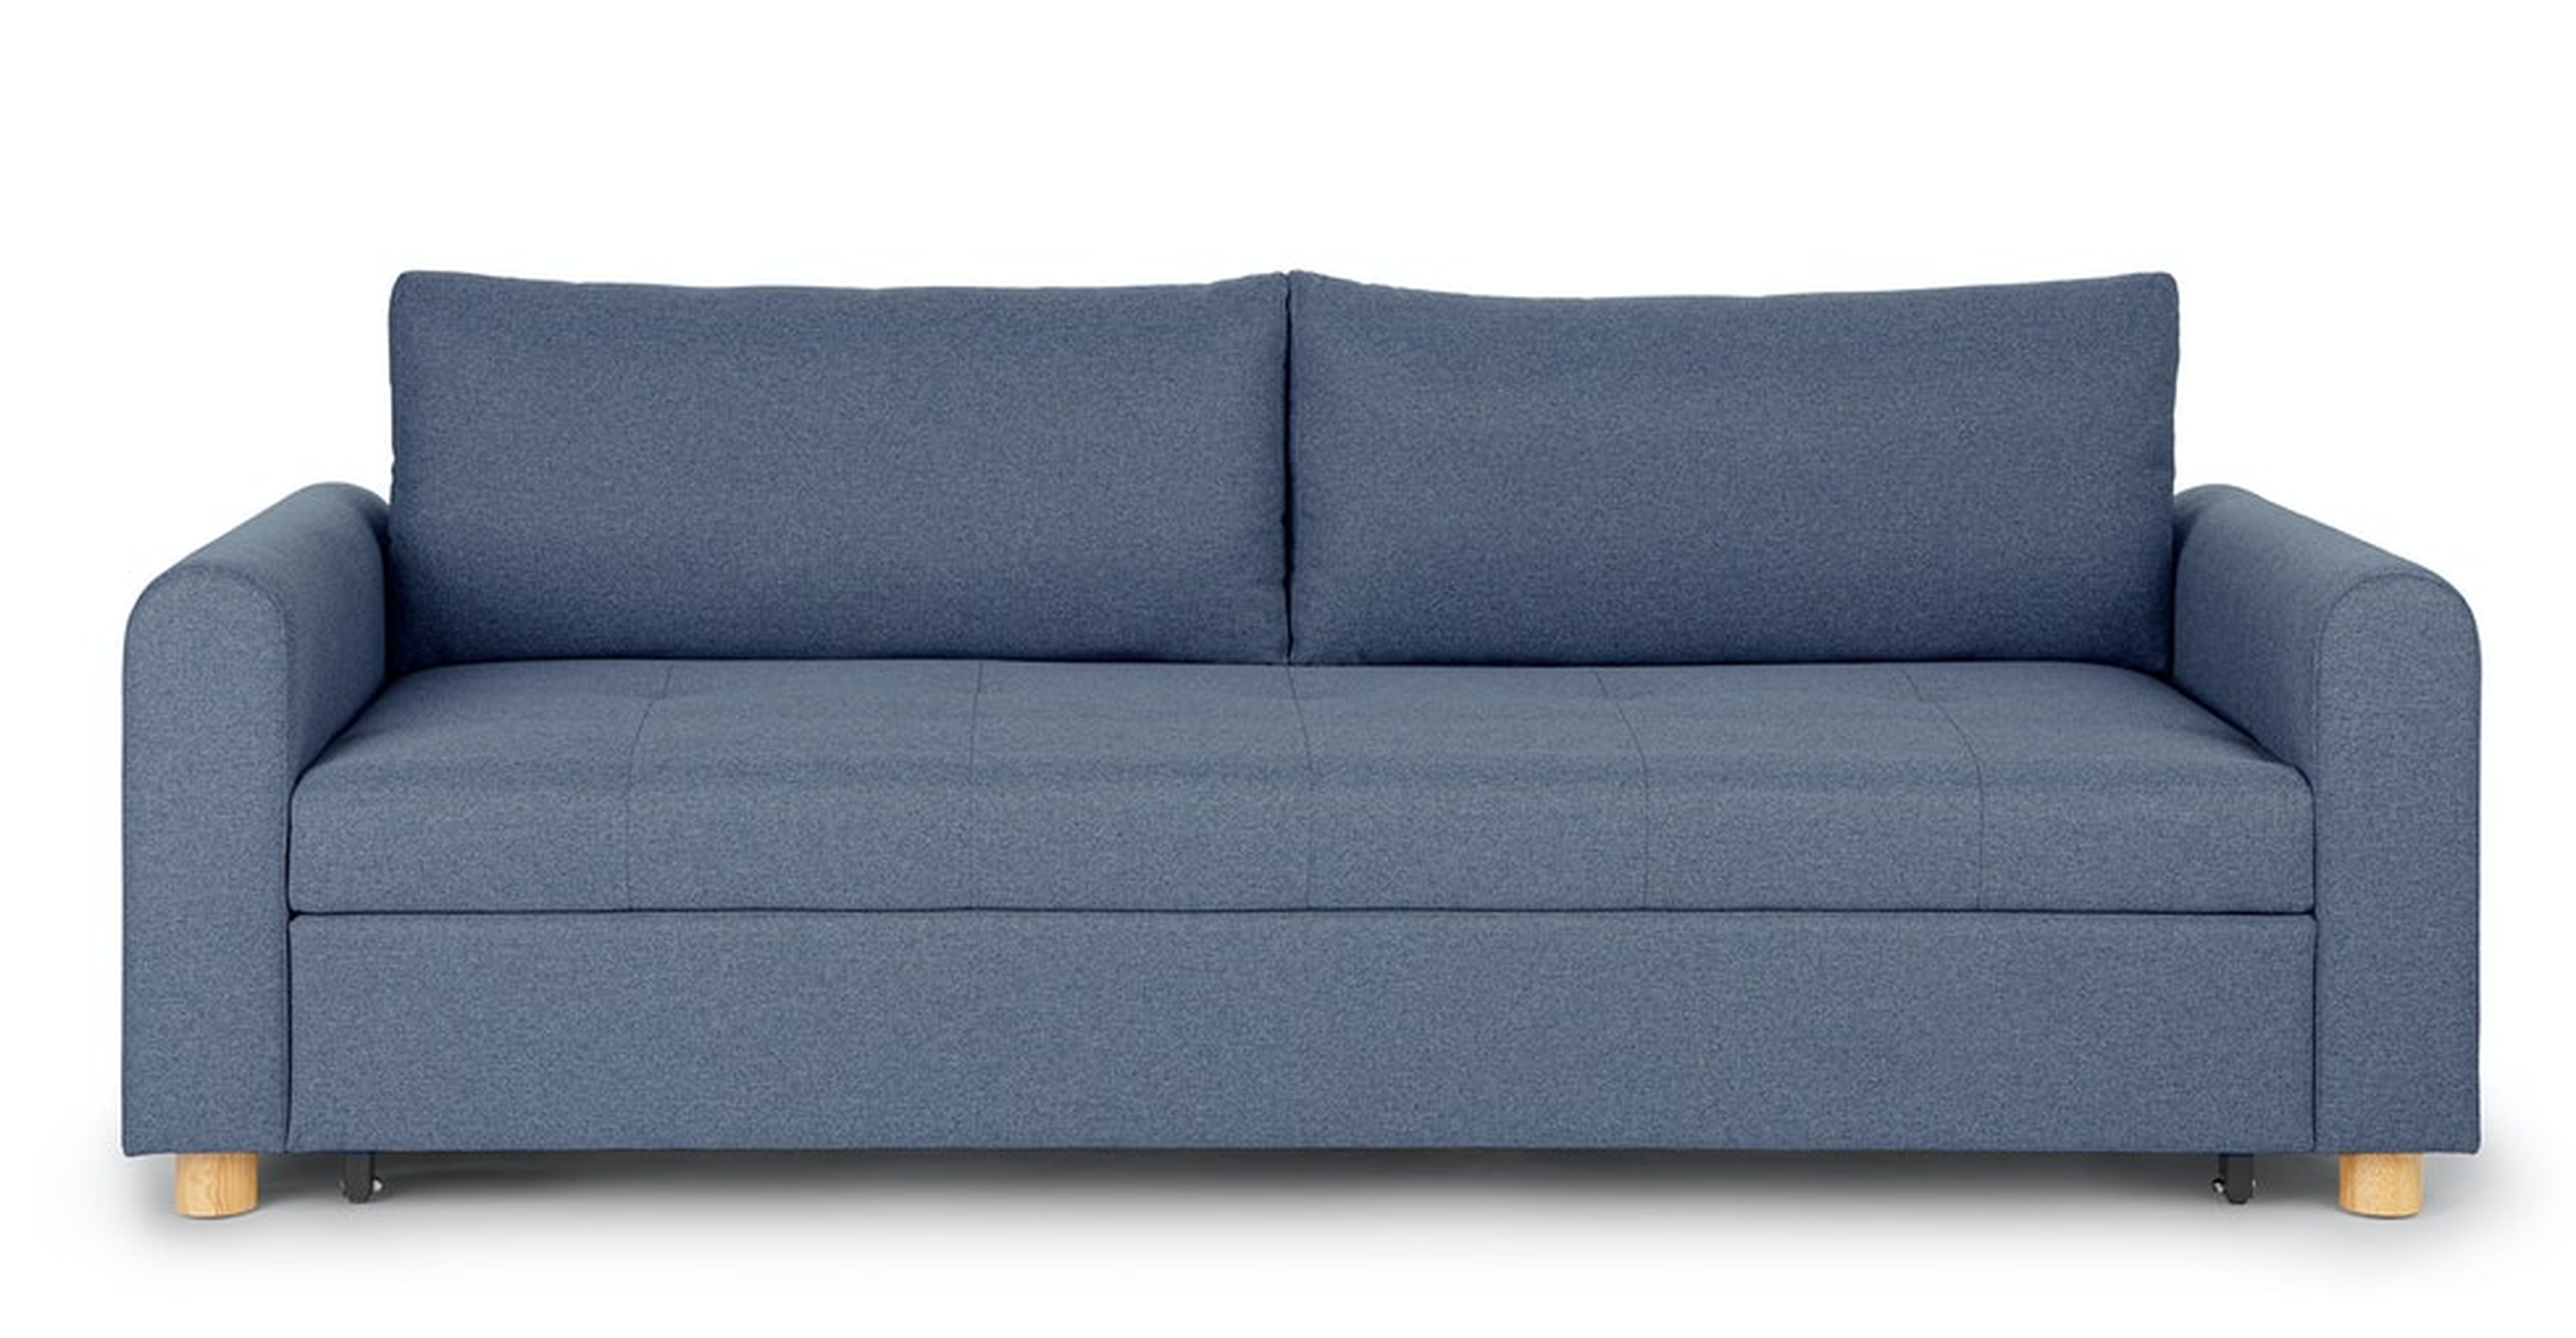 Nordby Lull Blue Sofa Bed - Article